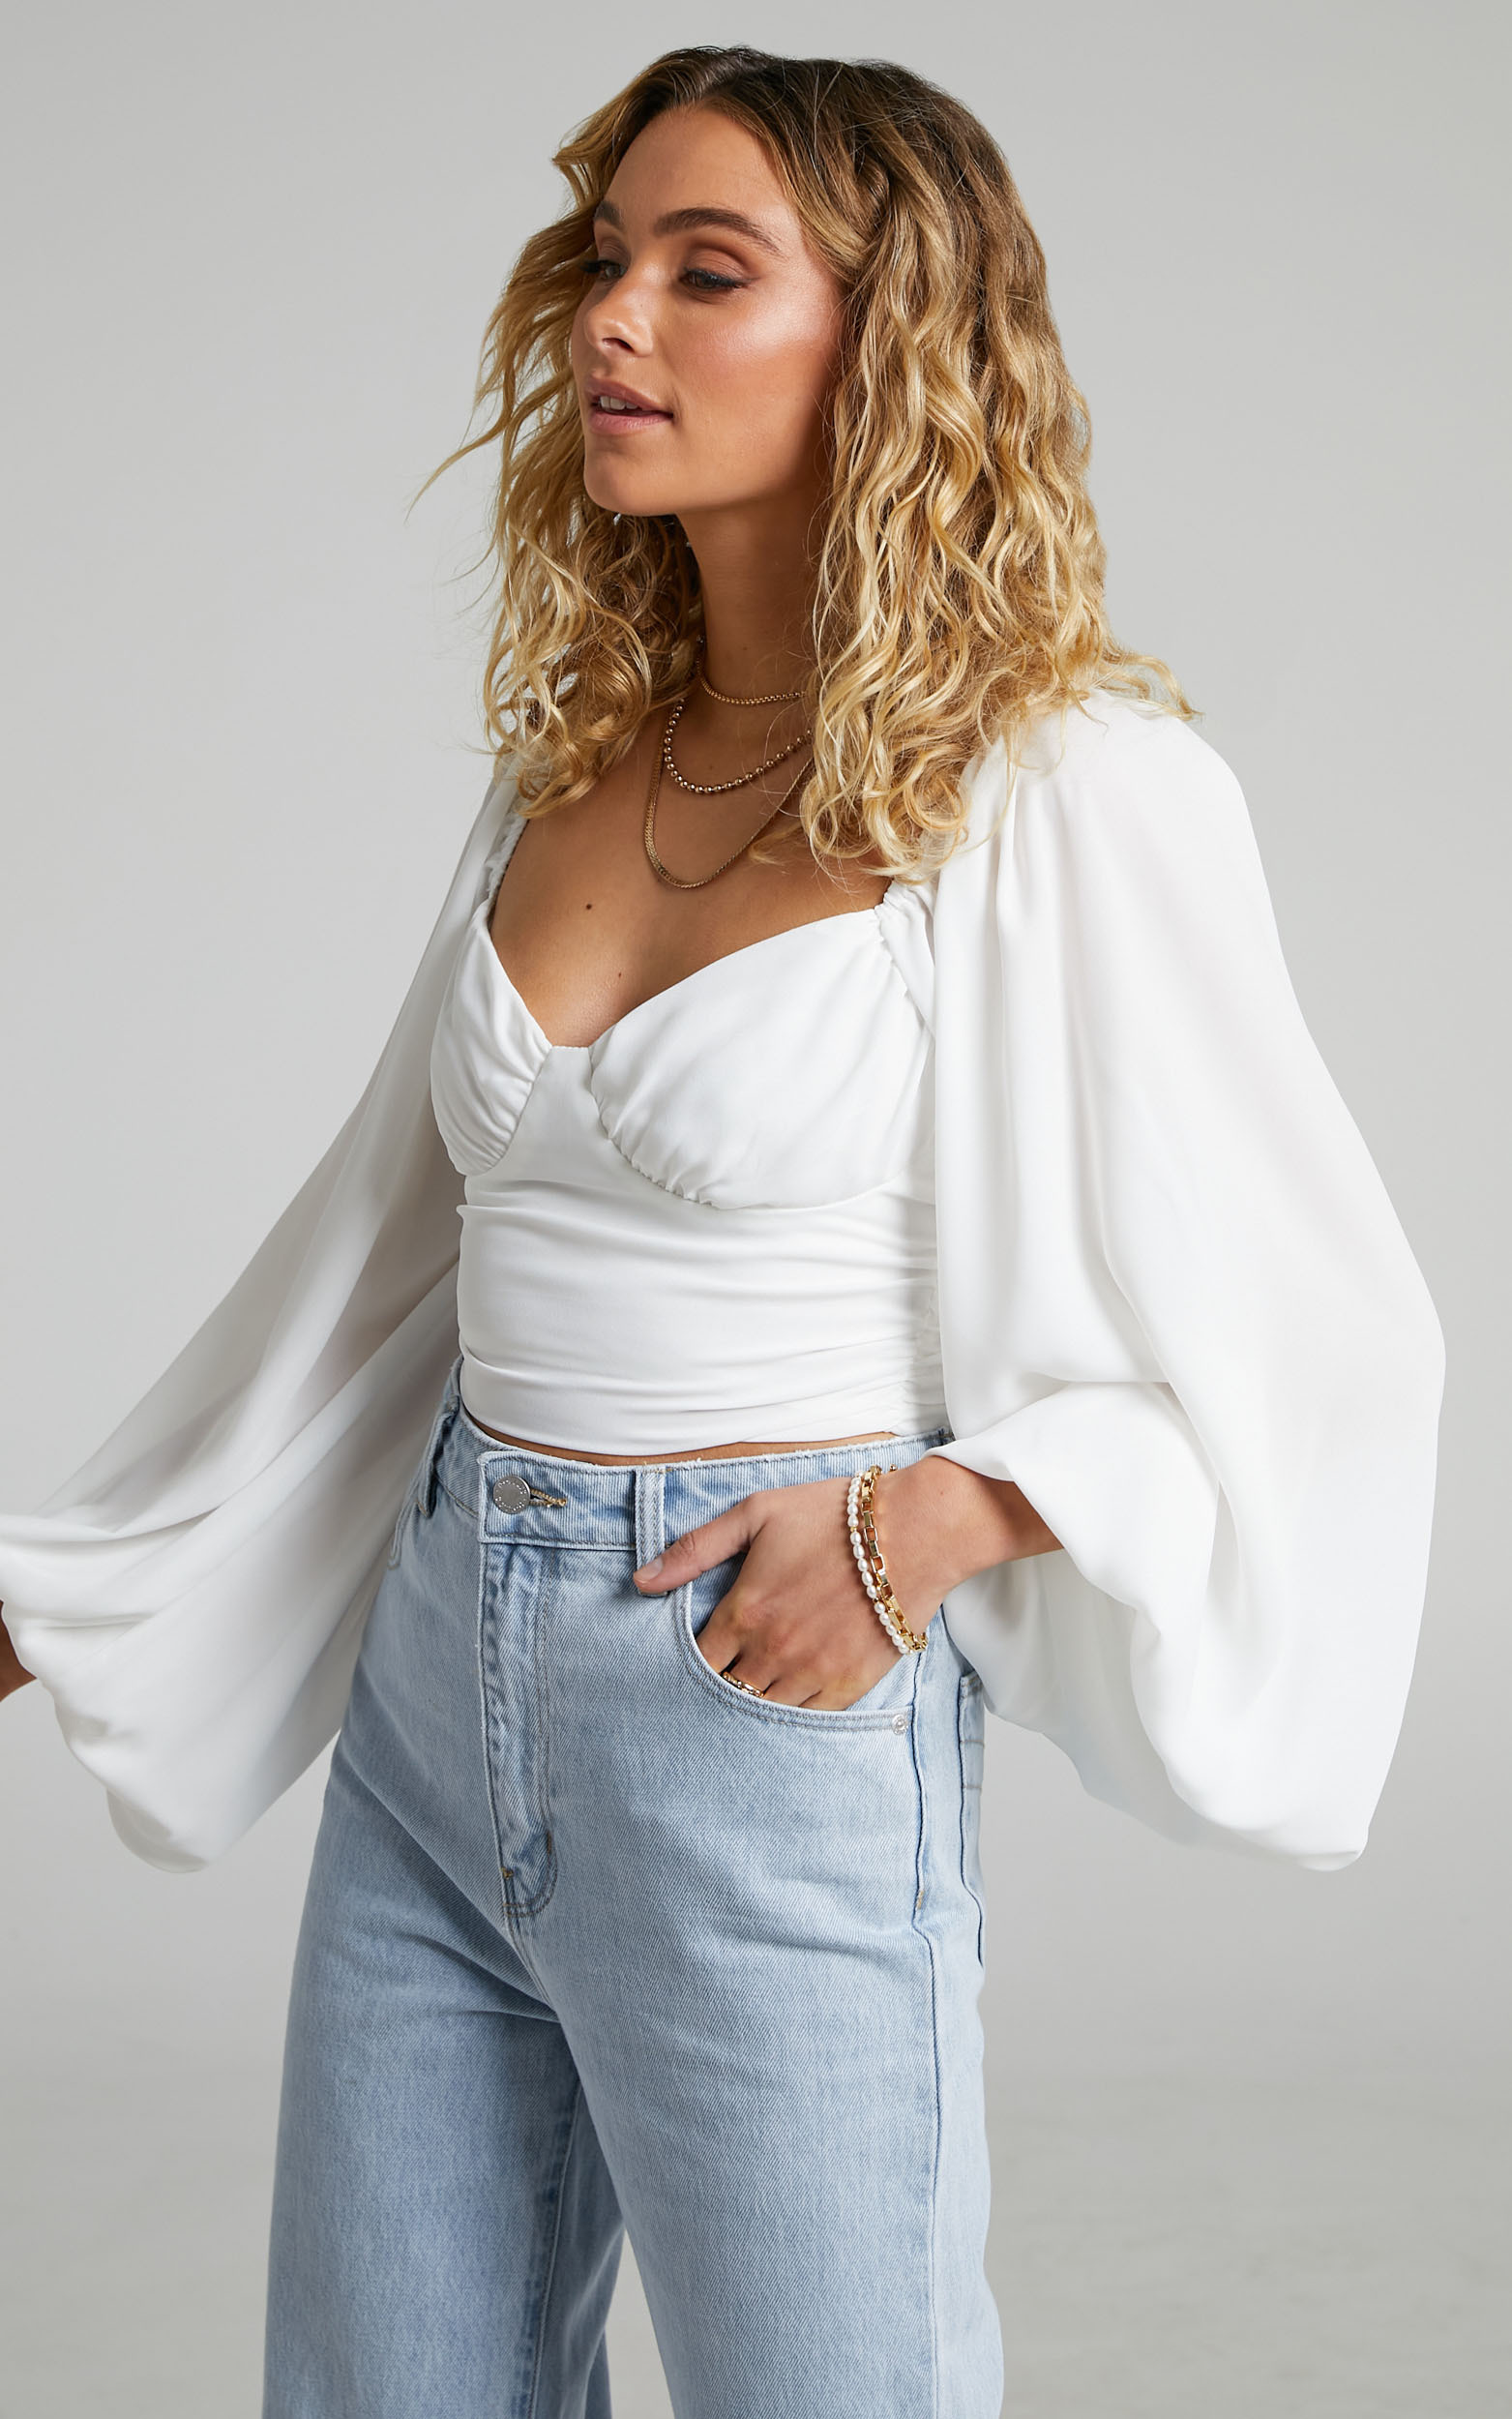 Follan Long Sleeve Shirred Back Bustier Crop Top in White - 04, WHT1, hi-res image number null